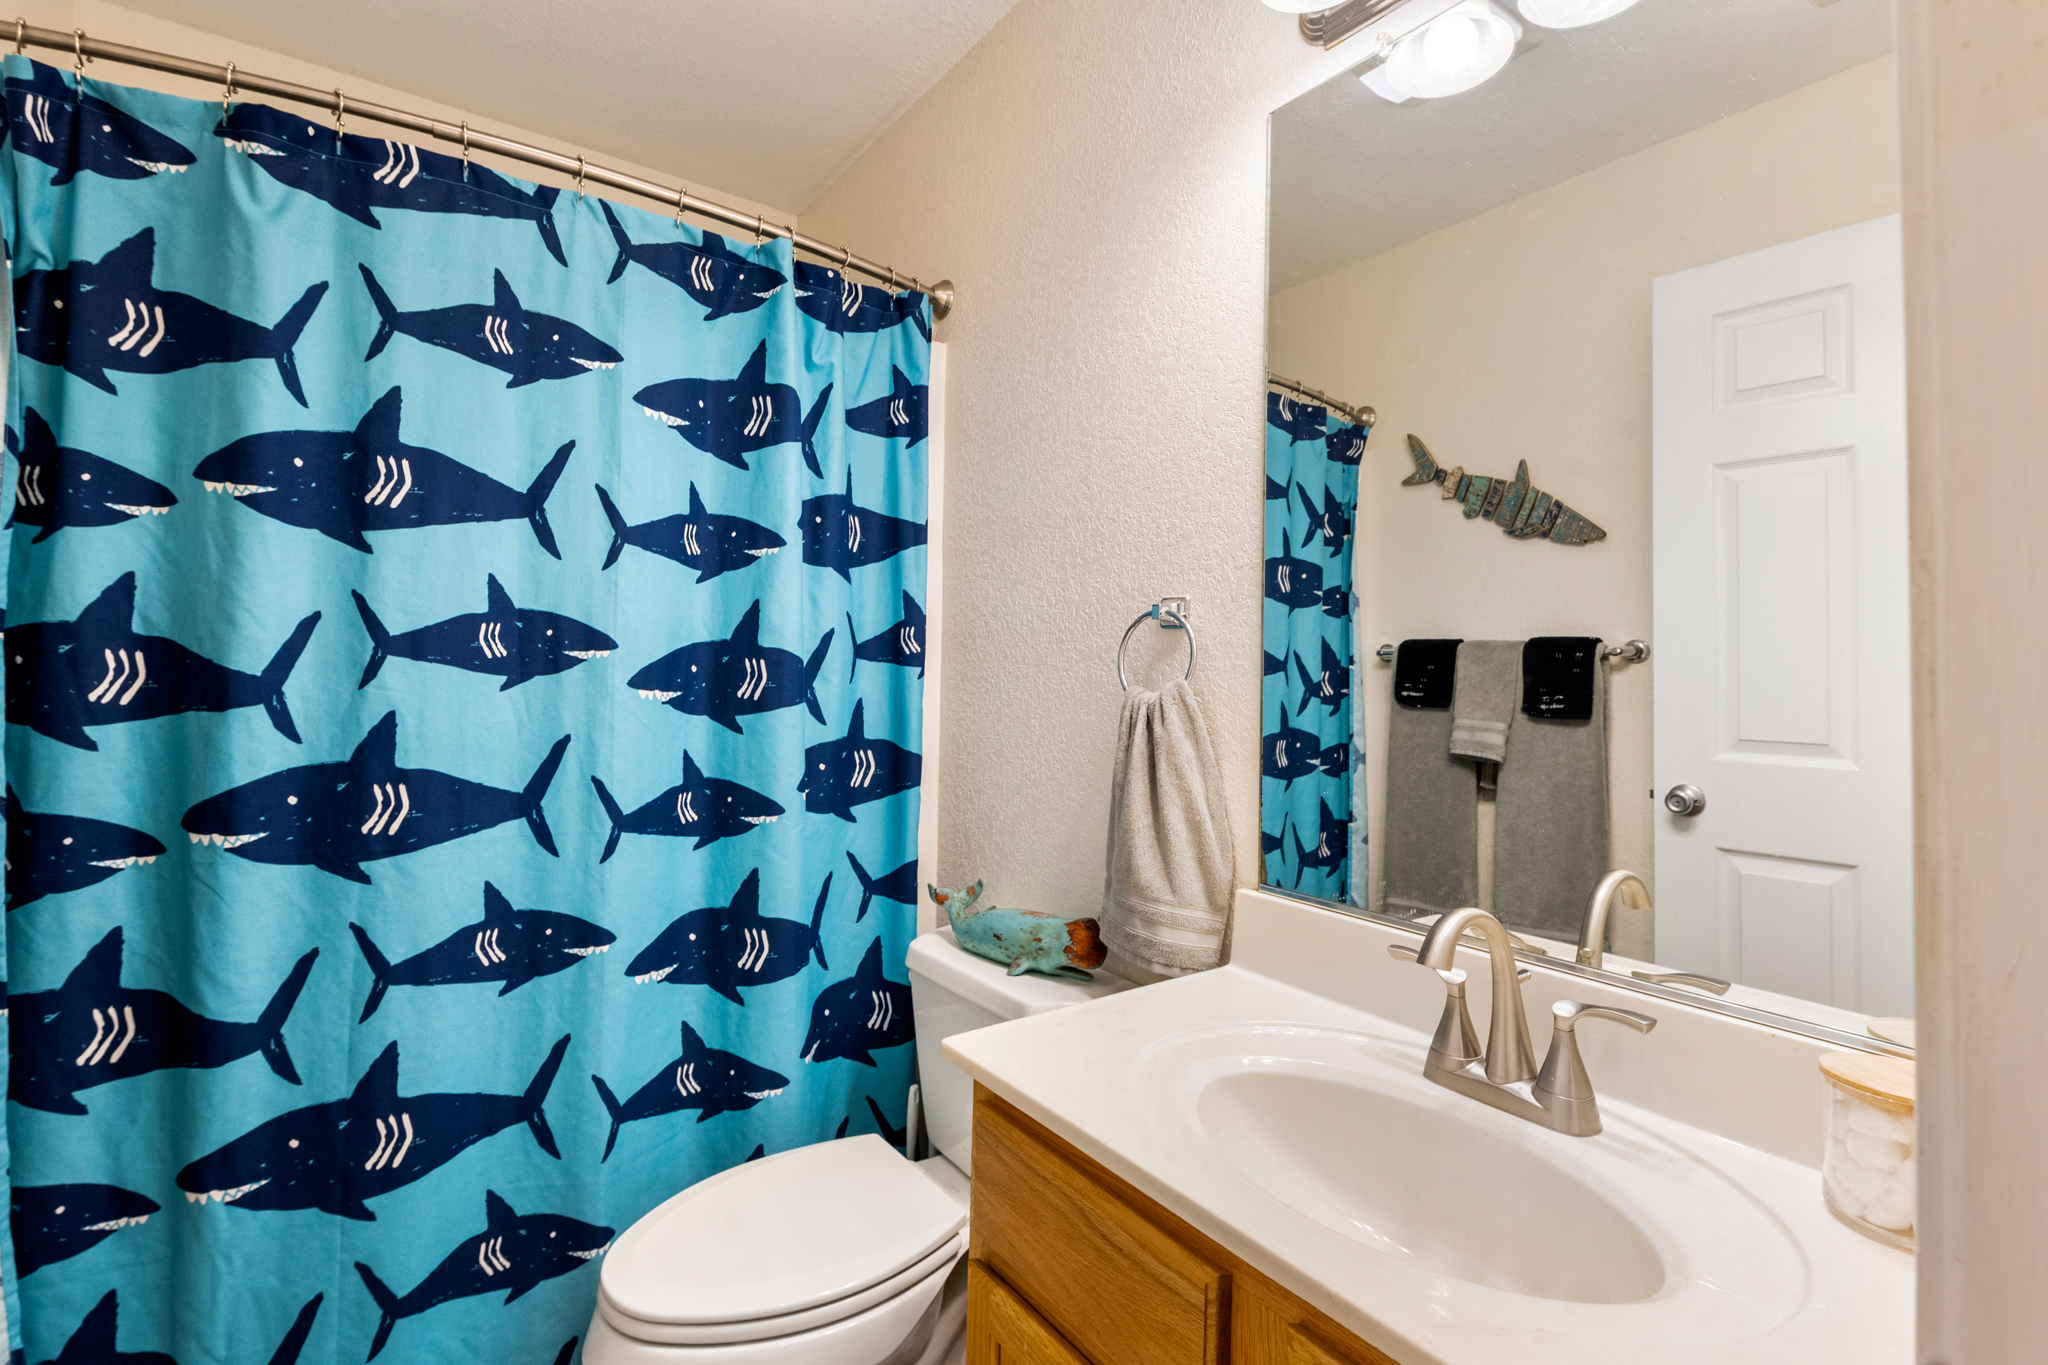 KDS88: Barnacles | Top Level Hall Bath